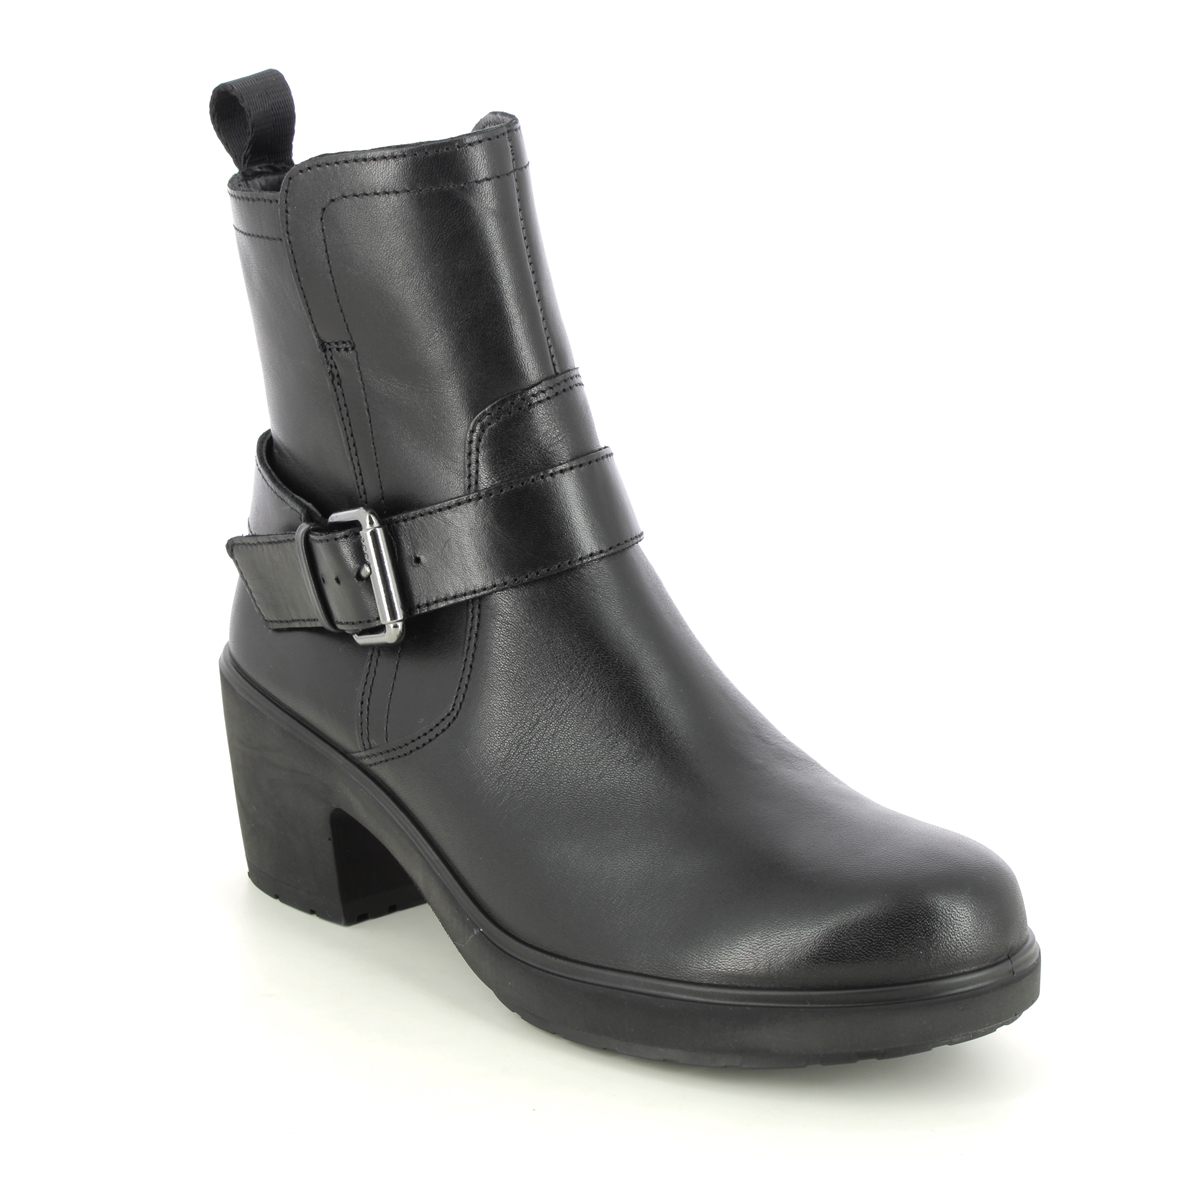 Ecco Zurich Tex Metropole Black Leather Womens Ankle Boots 222203-01001 In Size 40 In Plain Black Leather